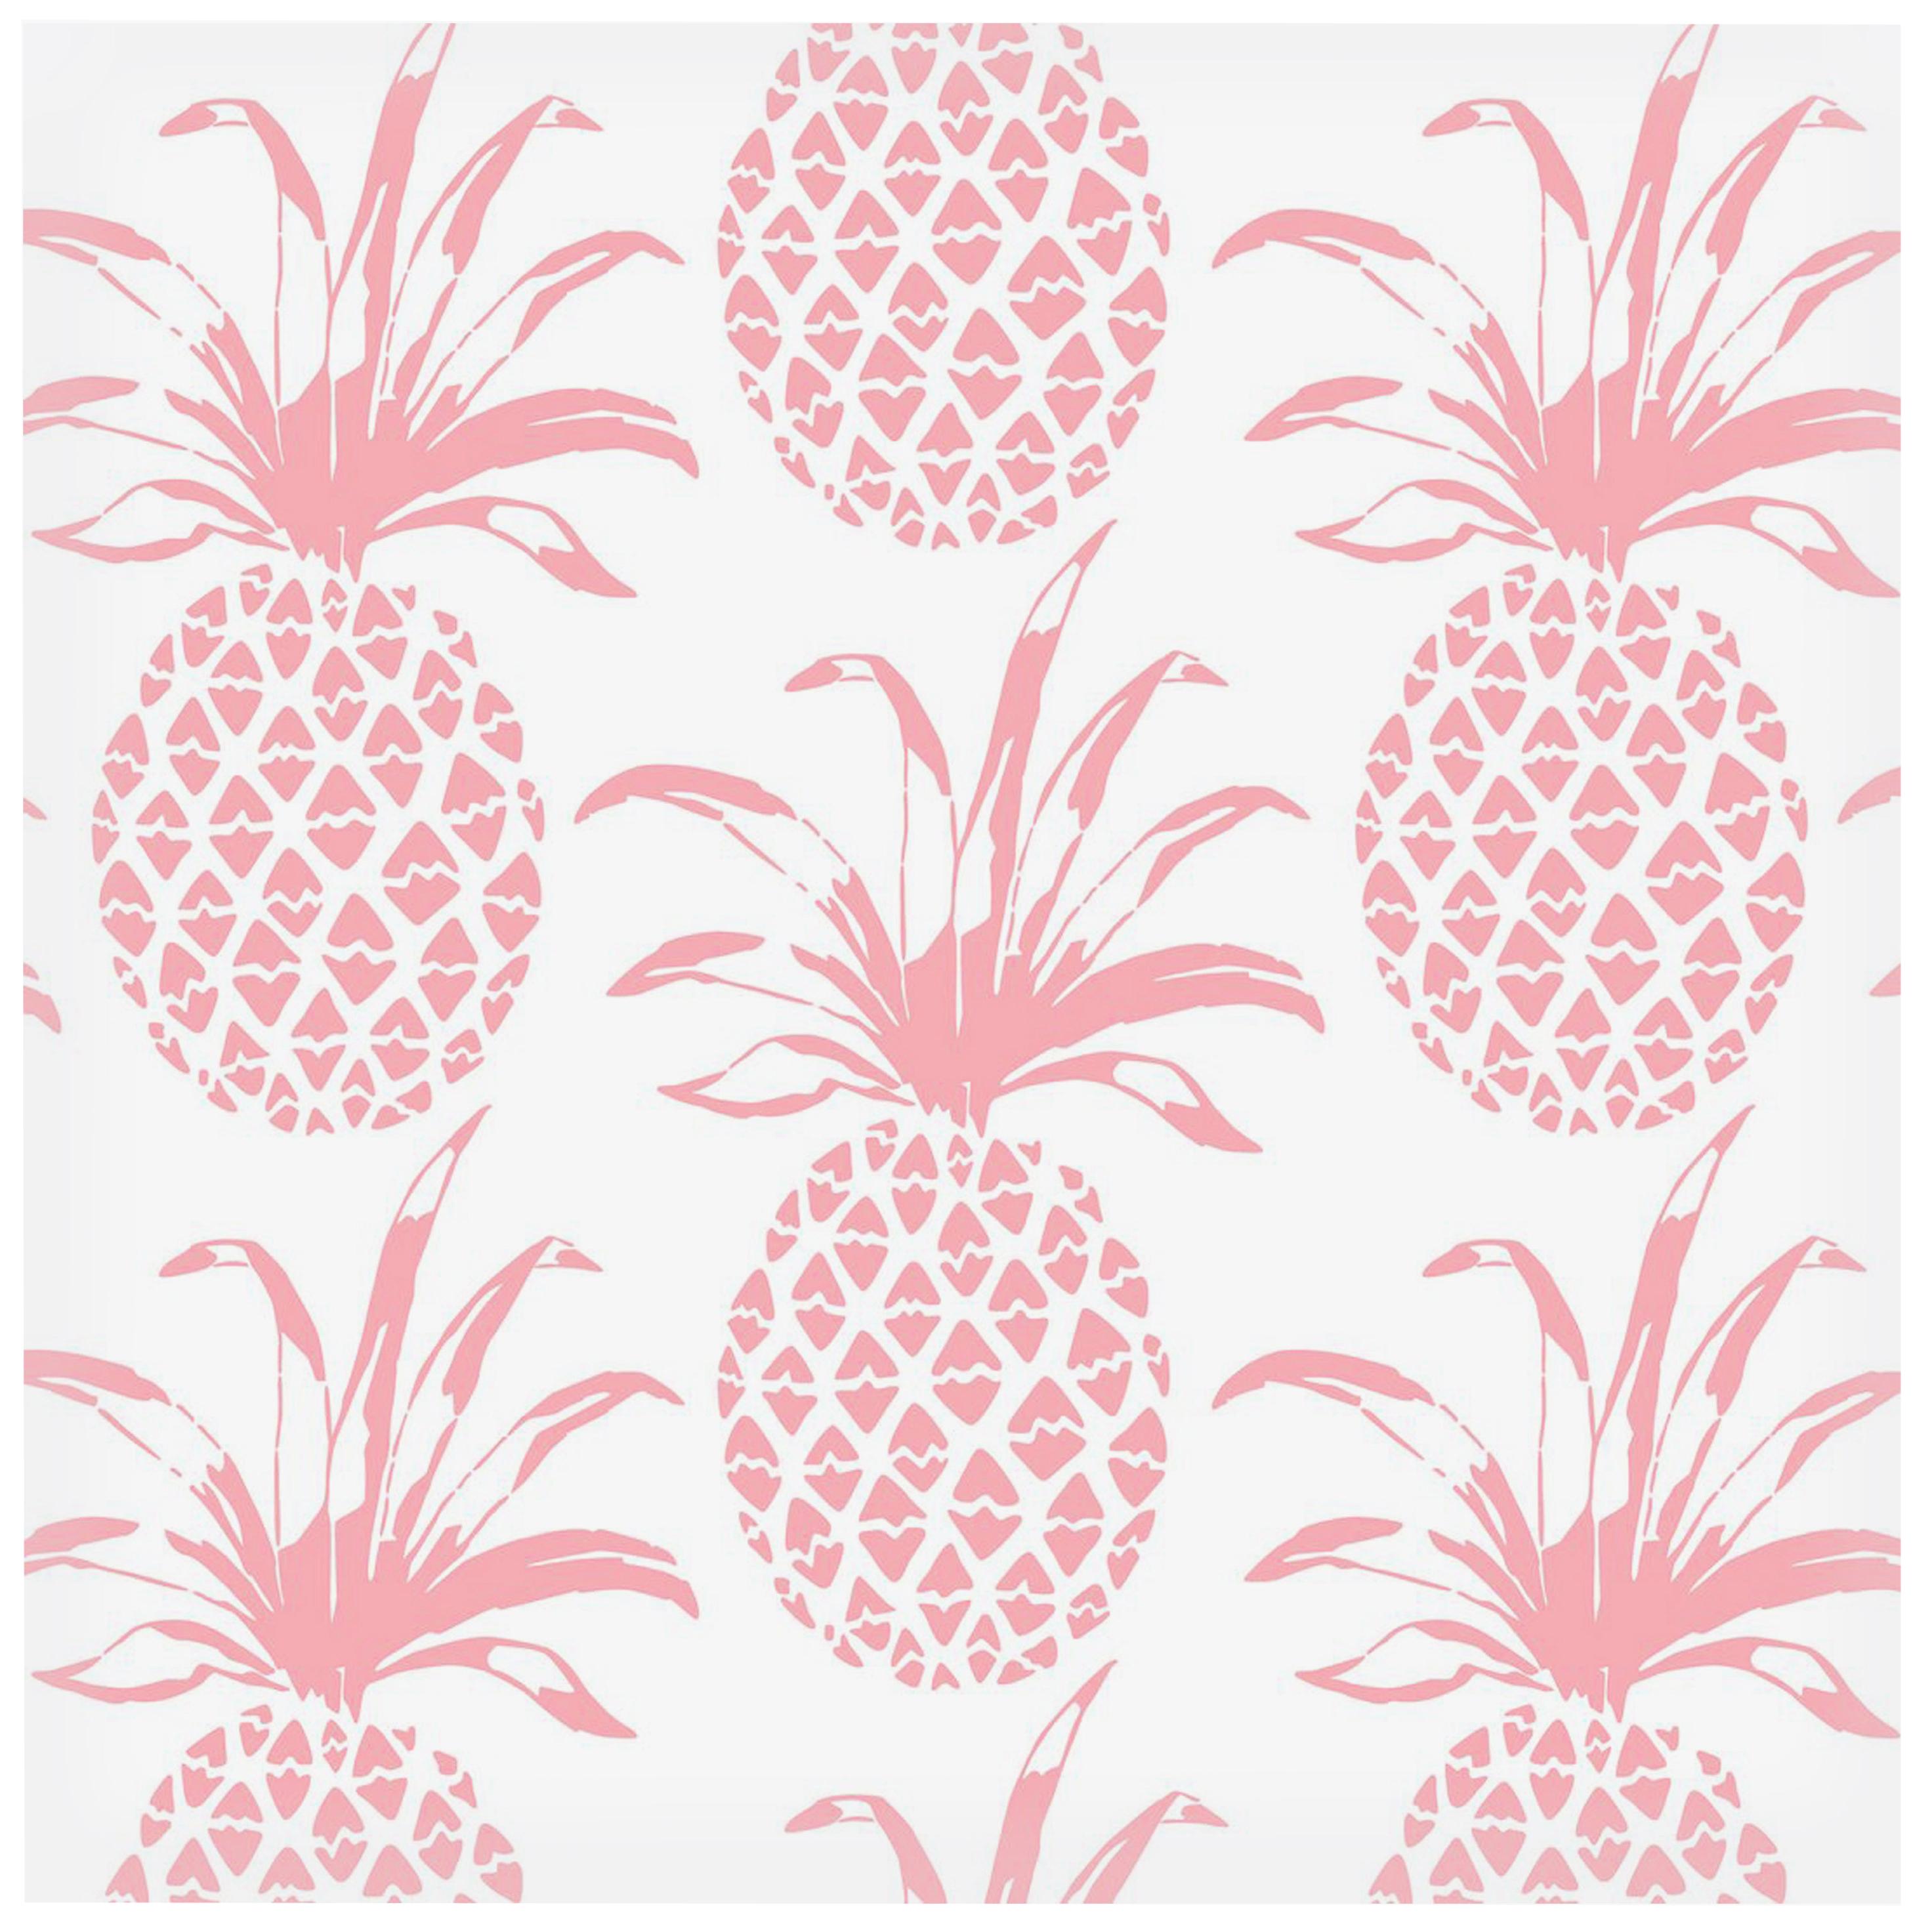 Piña Sola Designer Wallpaper in Rosa 'Peachy-Pink and White' For Sale